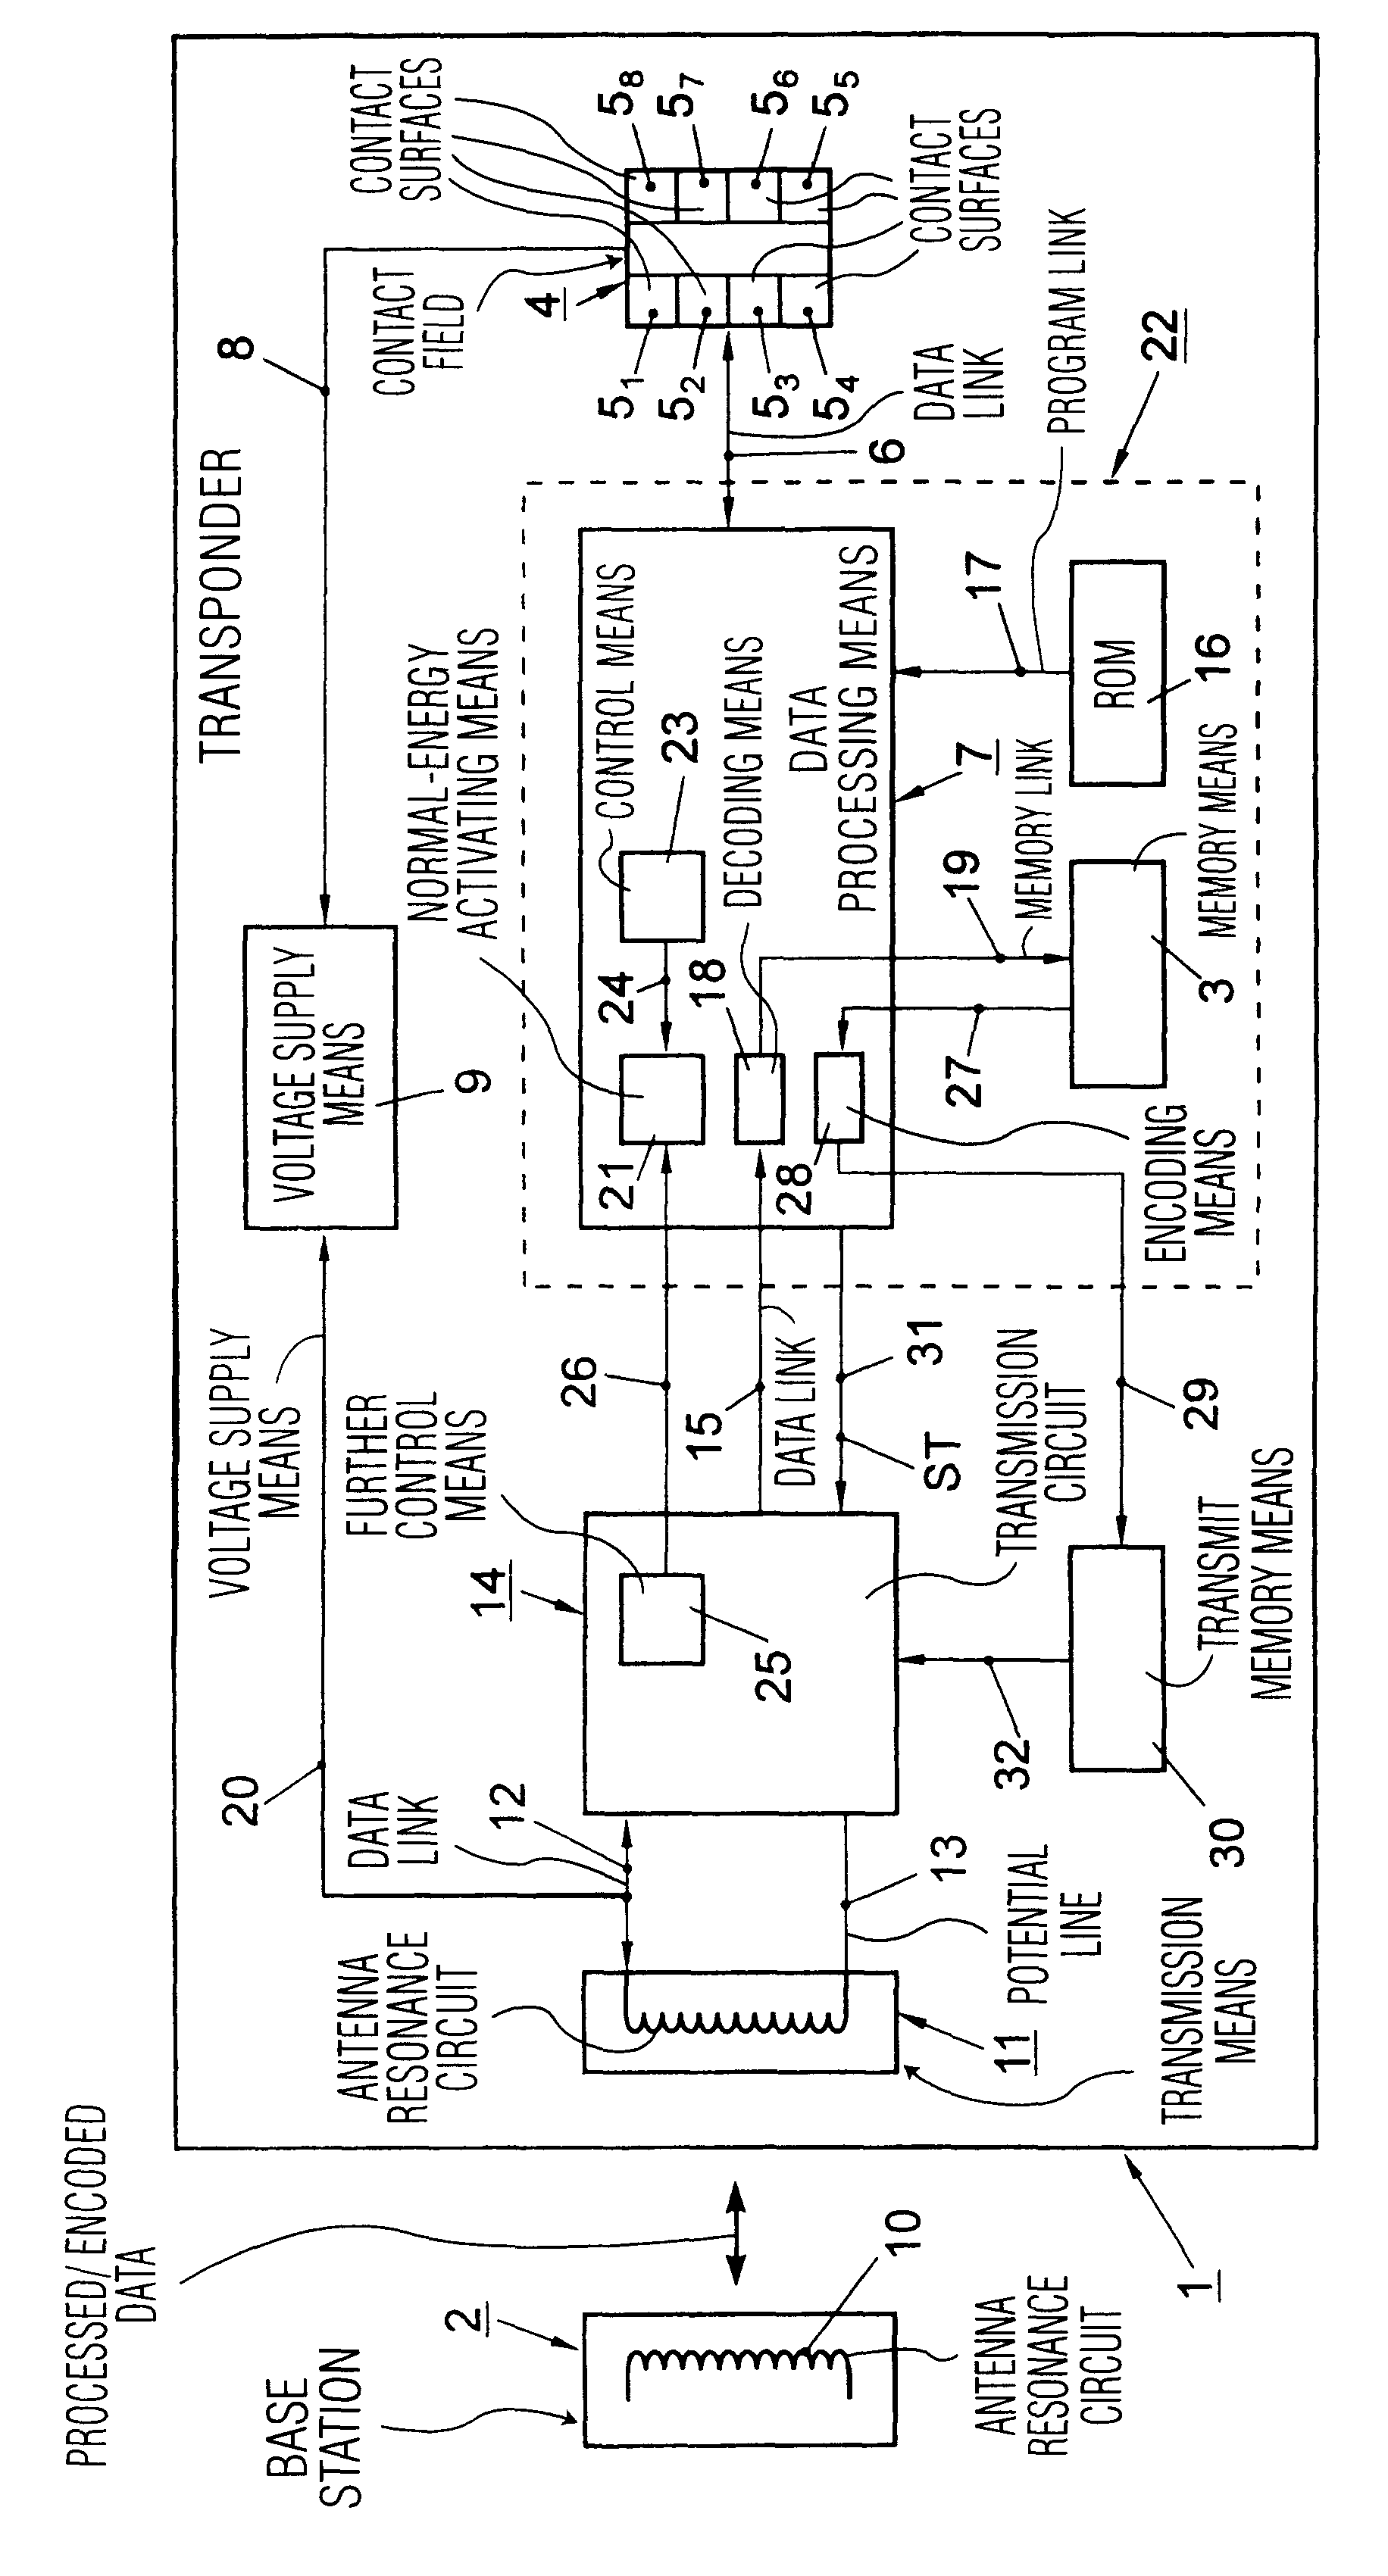 Transponder for transmitting processed data to a base station over large distances and at a high data transfer rate